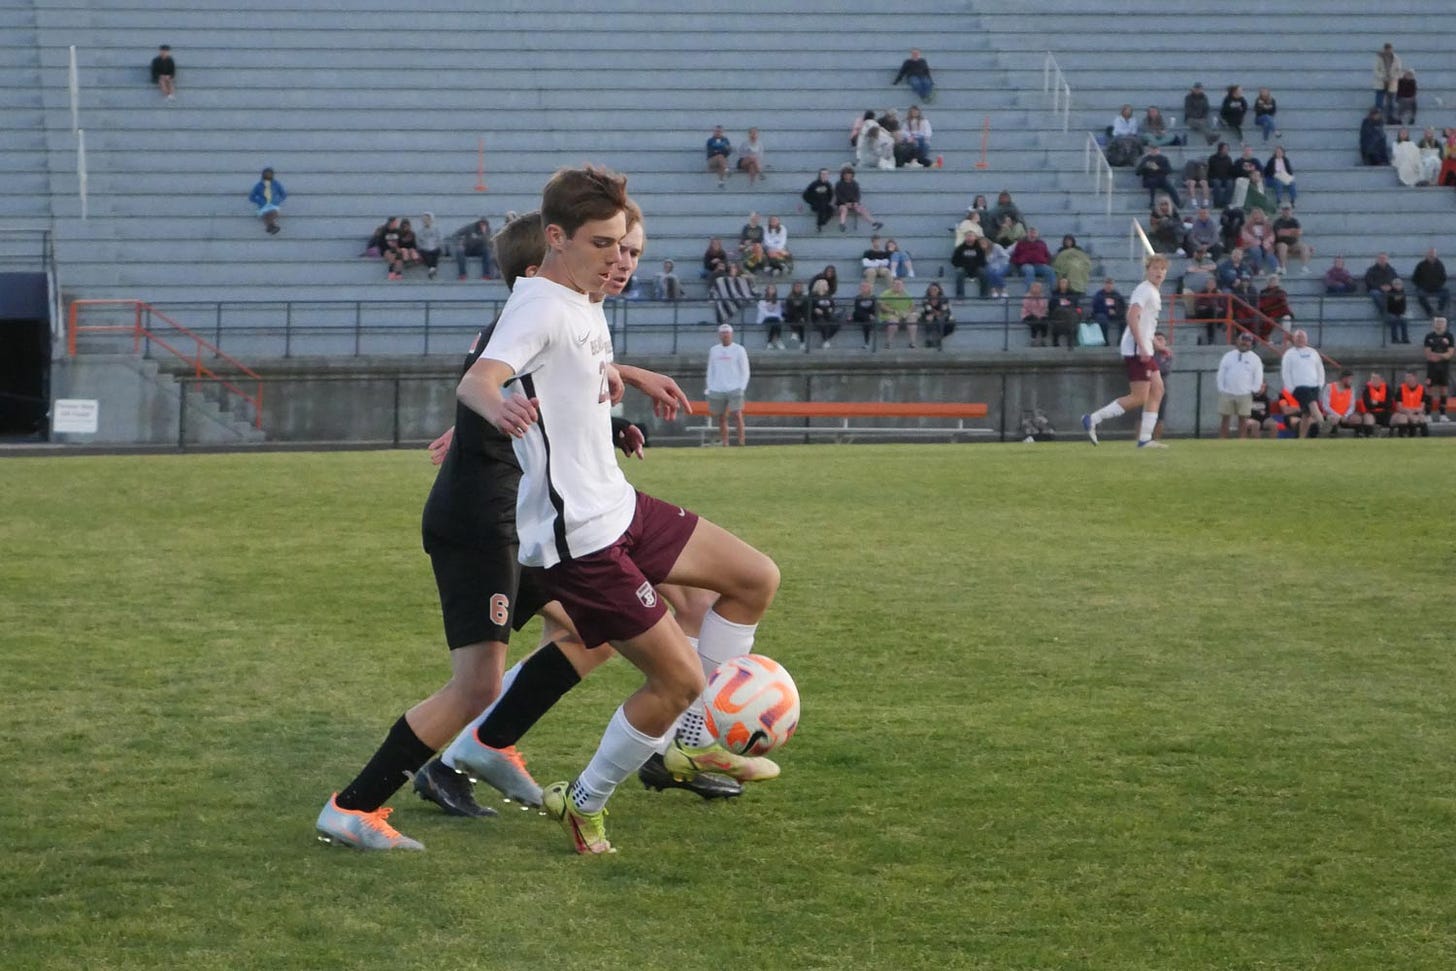 Bearden and William Blount boys soccer players compete in a soccer game.